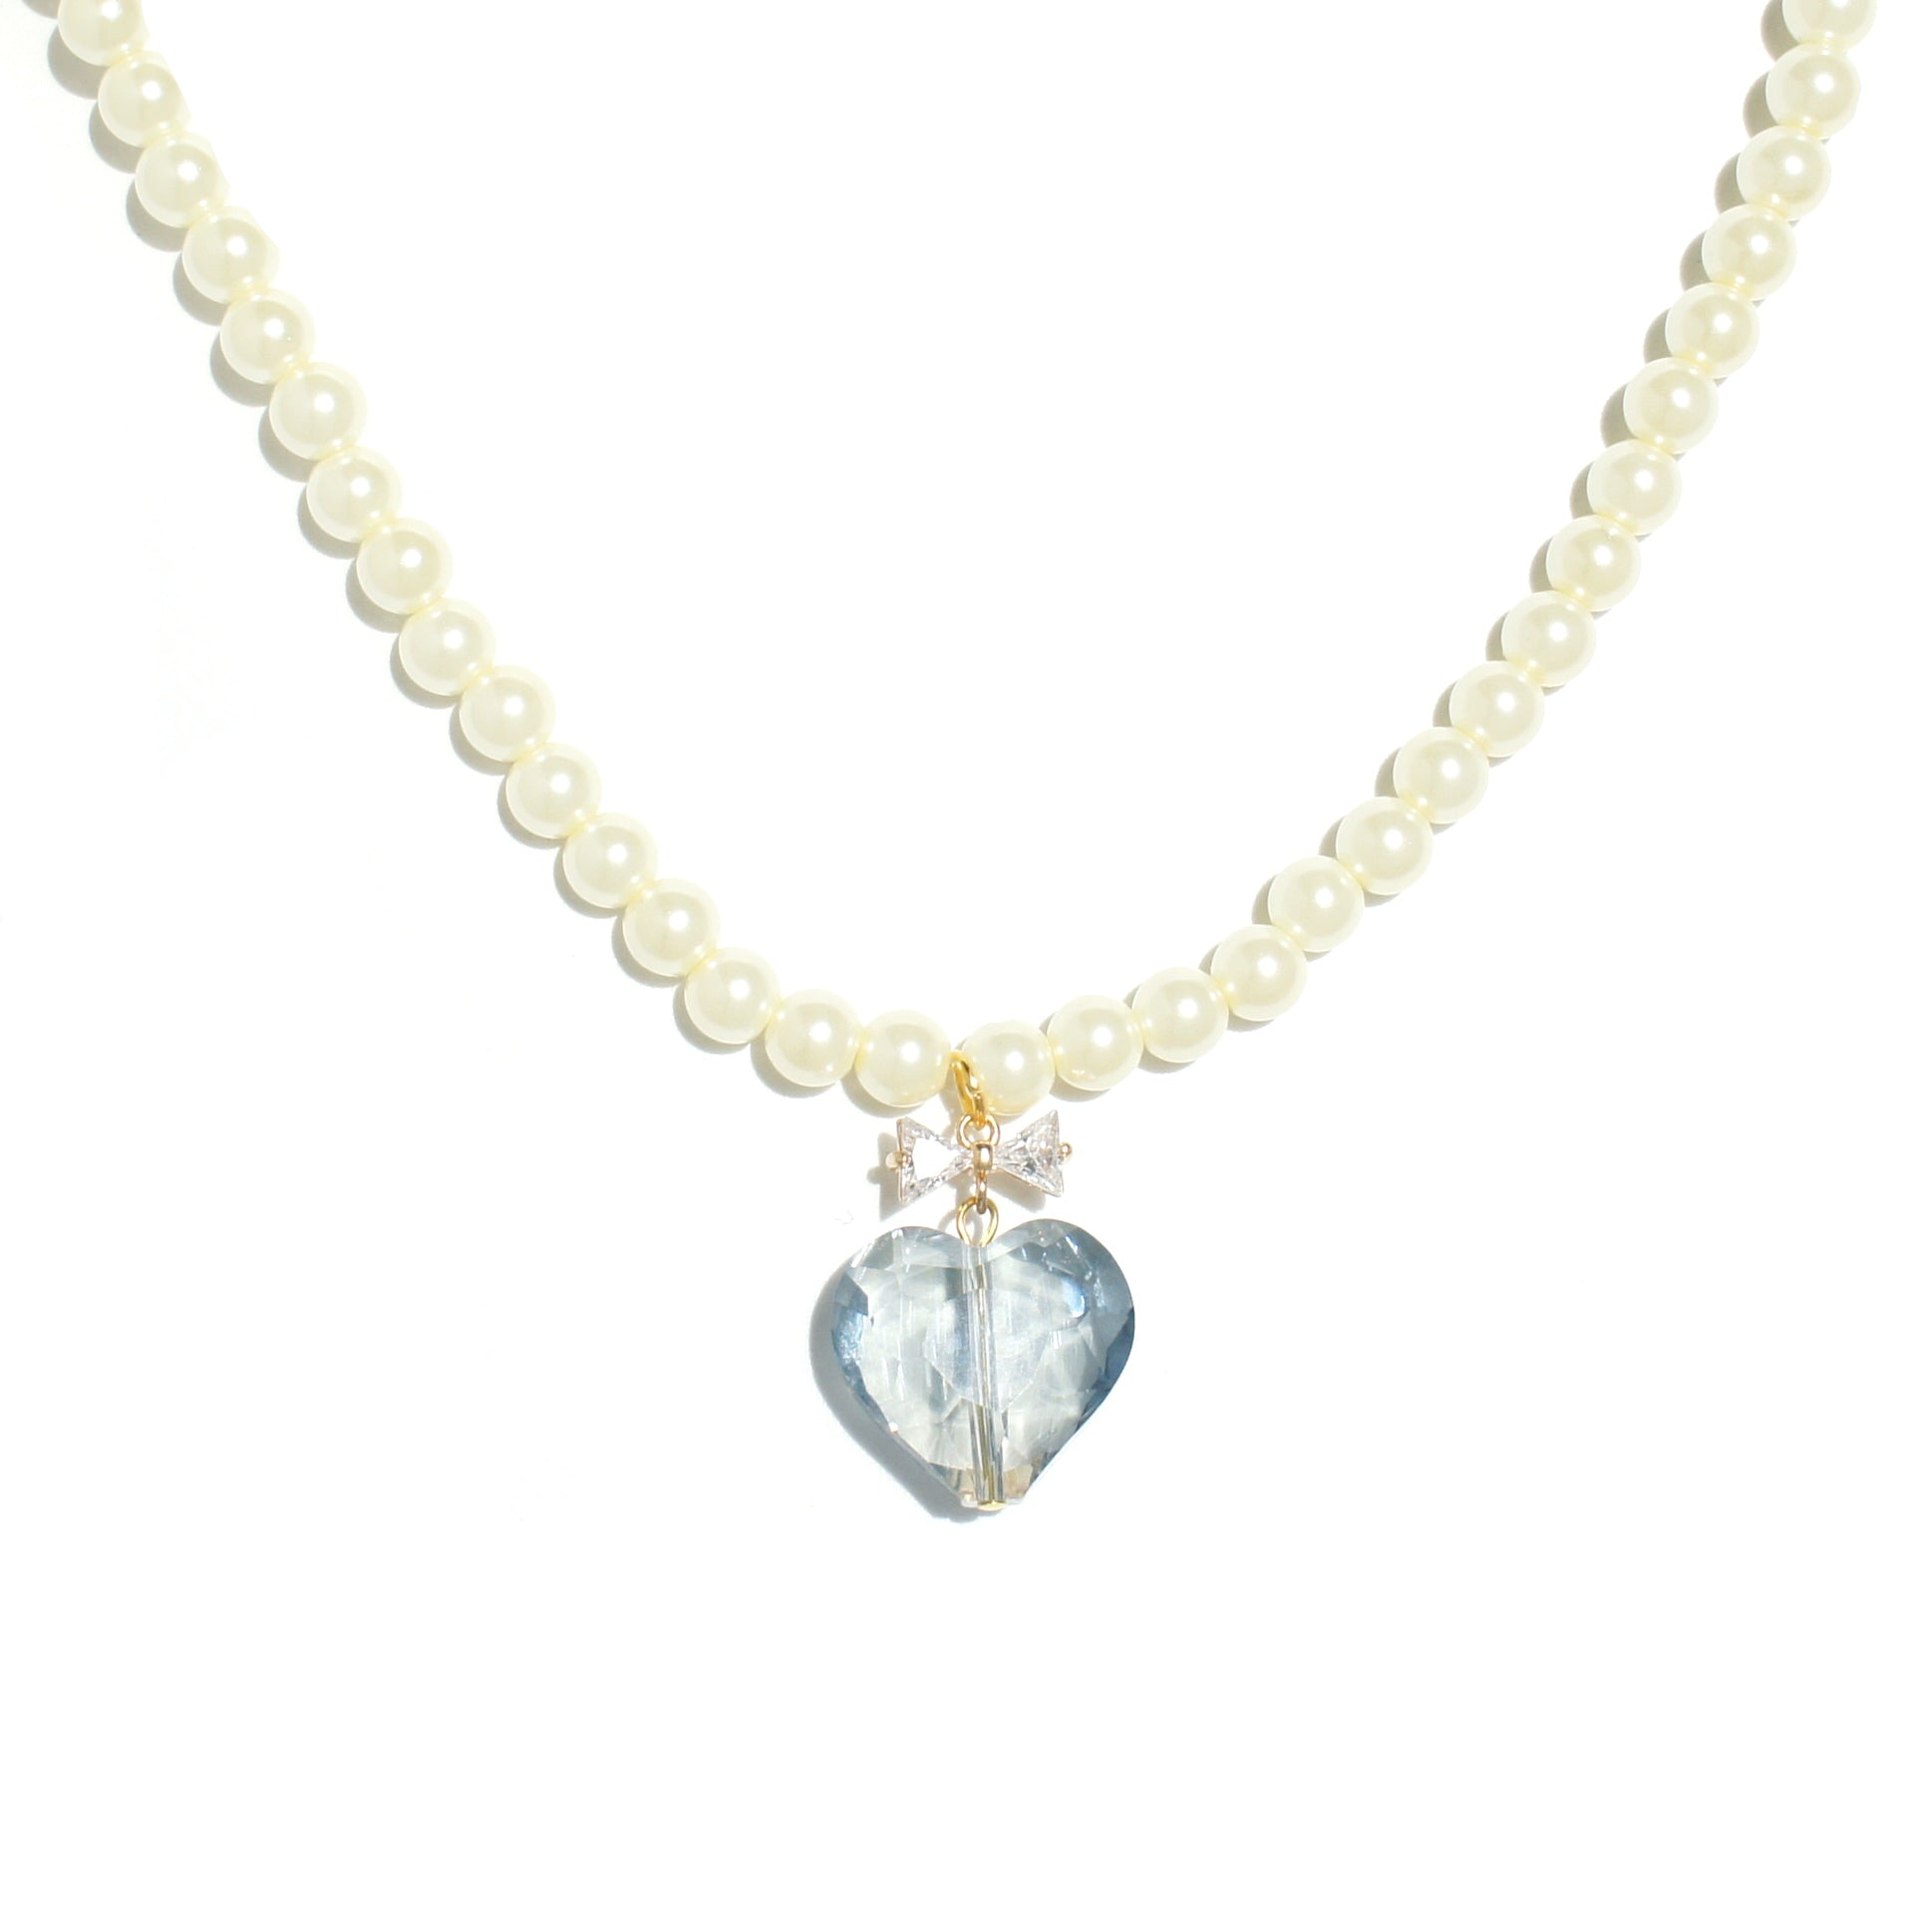 Whisper of Heart Pearl Necklace with Crystal Bow and Faceted Heart Pendant